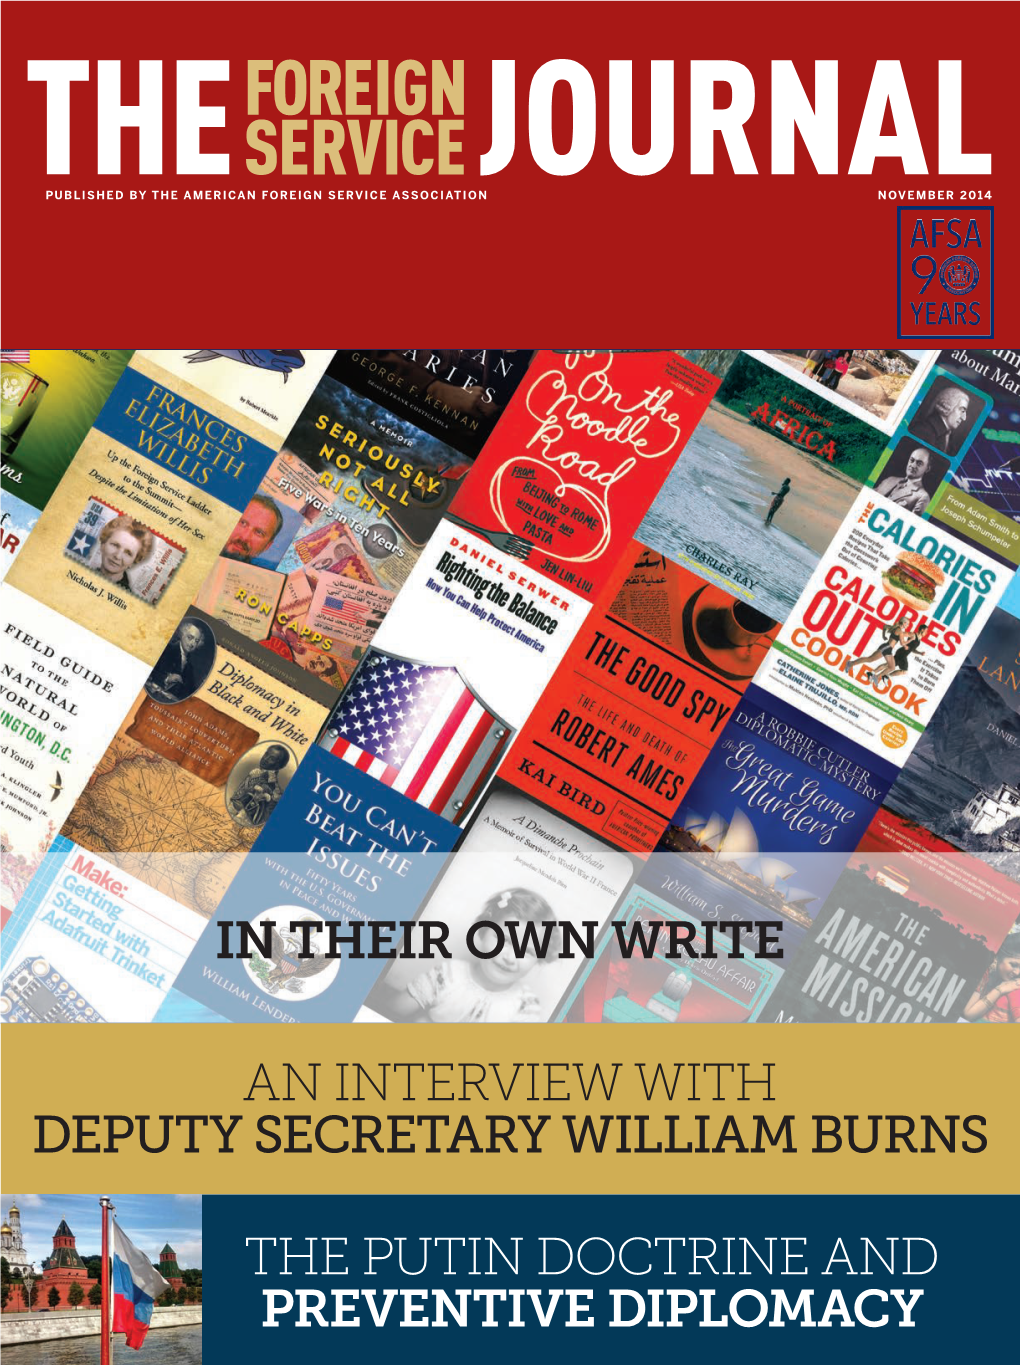 The Foreign Service Journal, November 2014